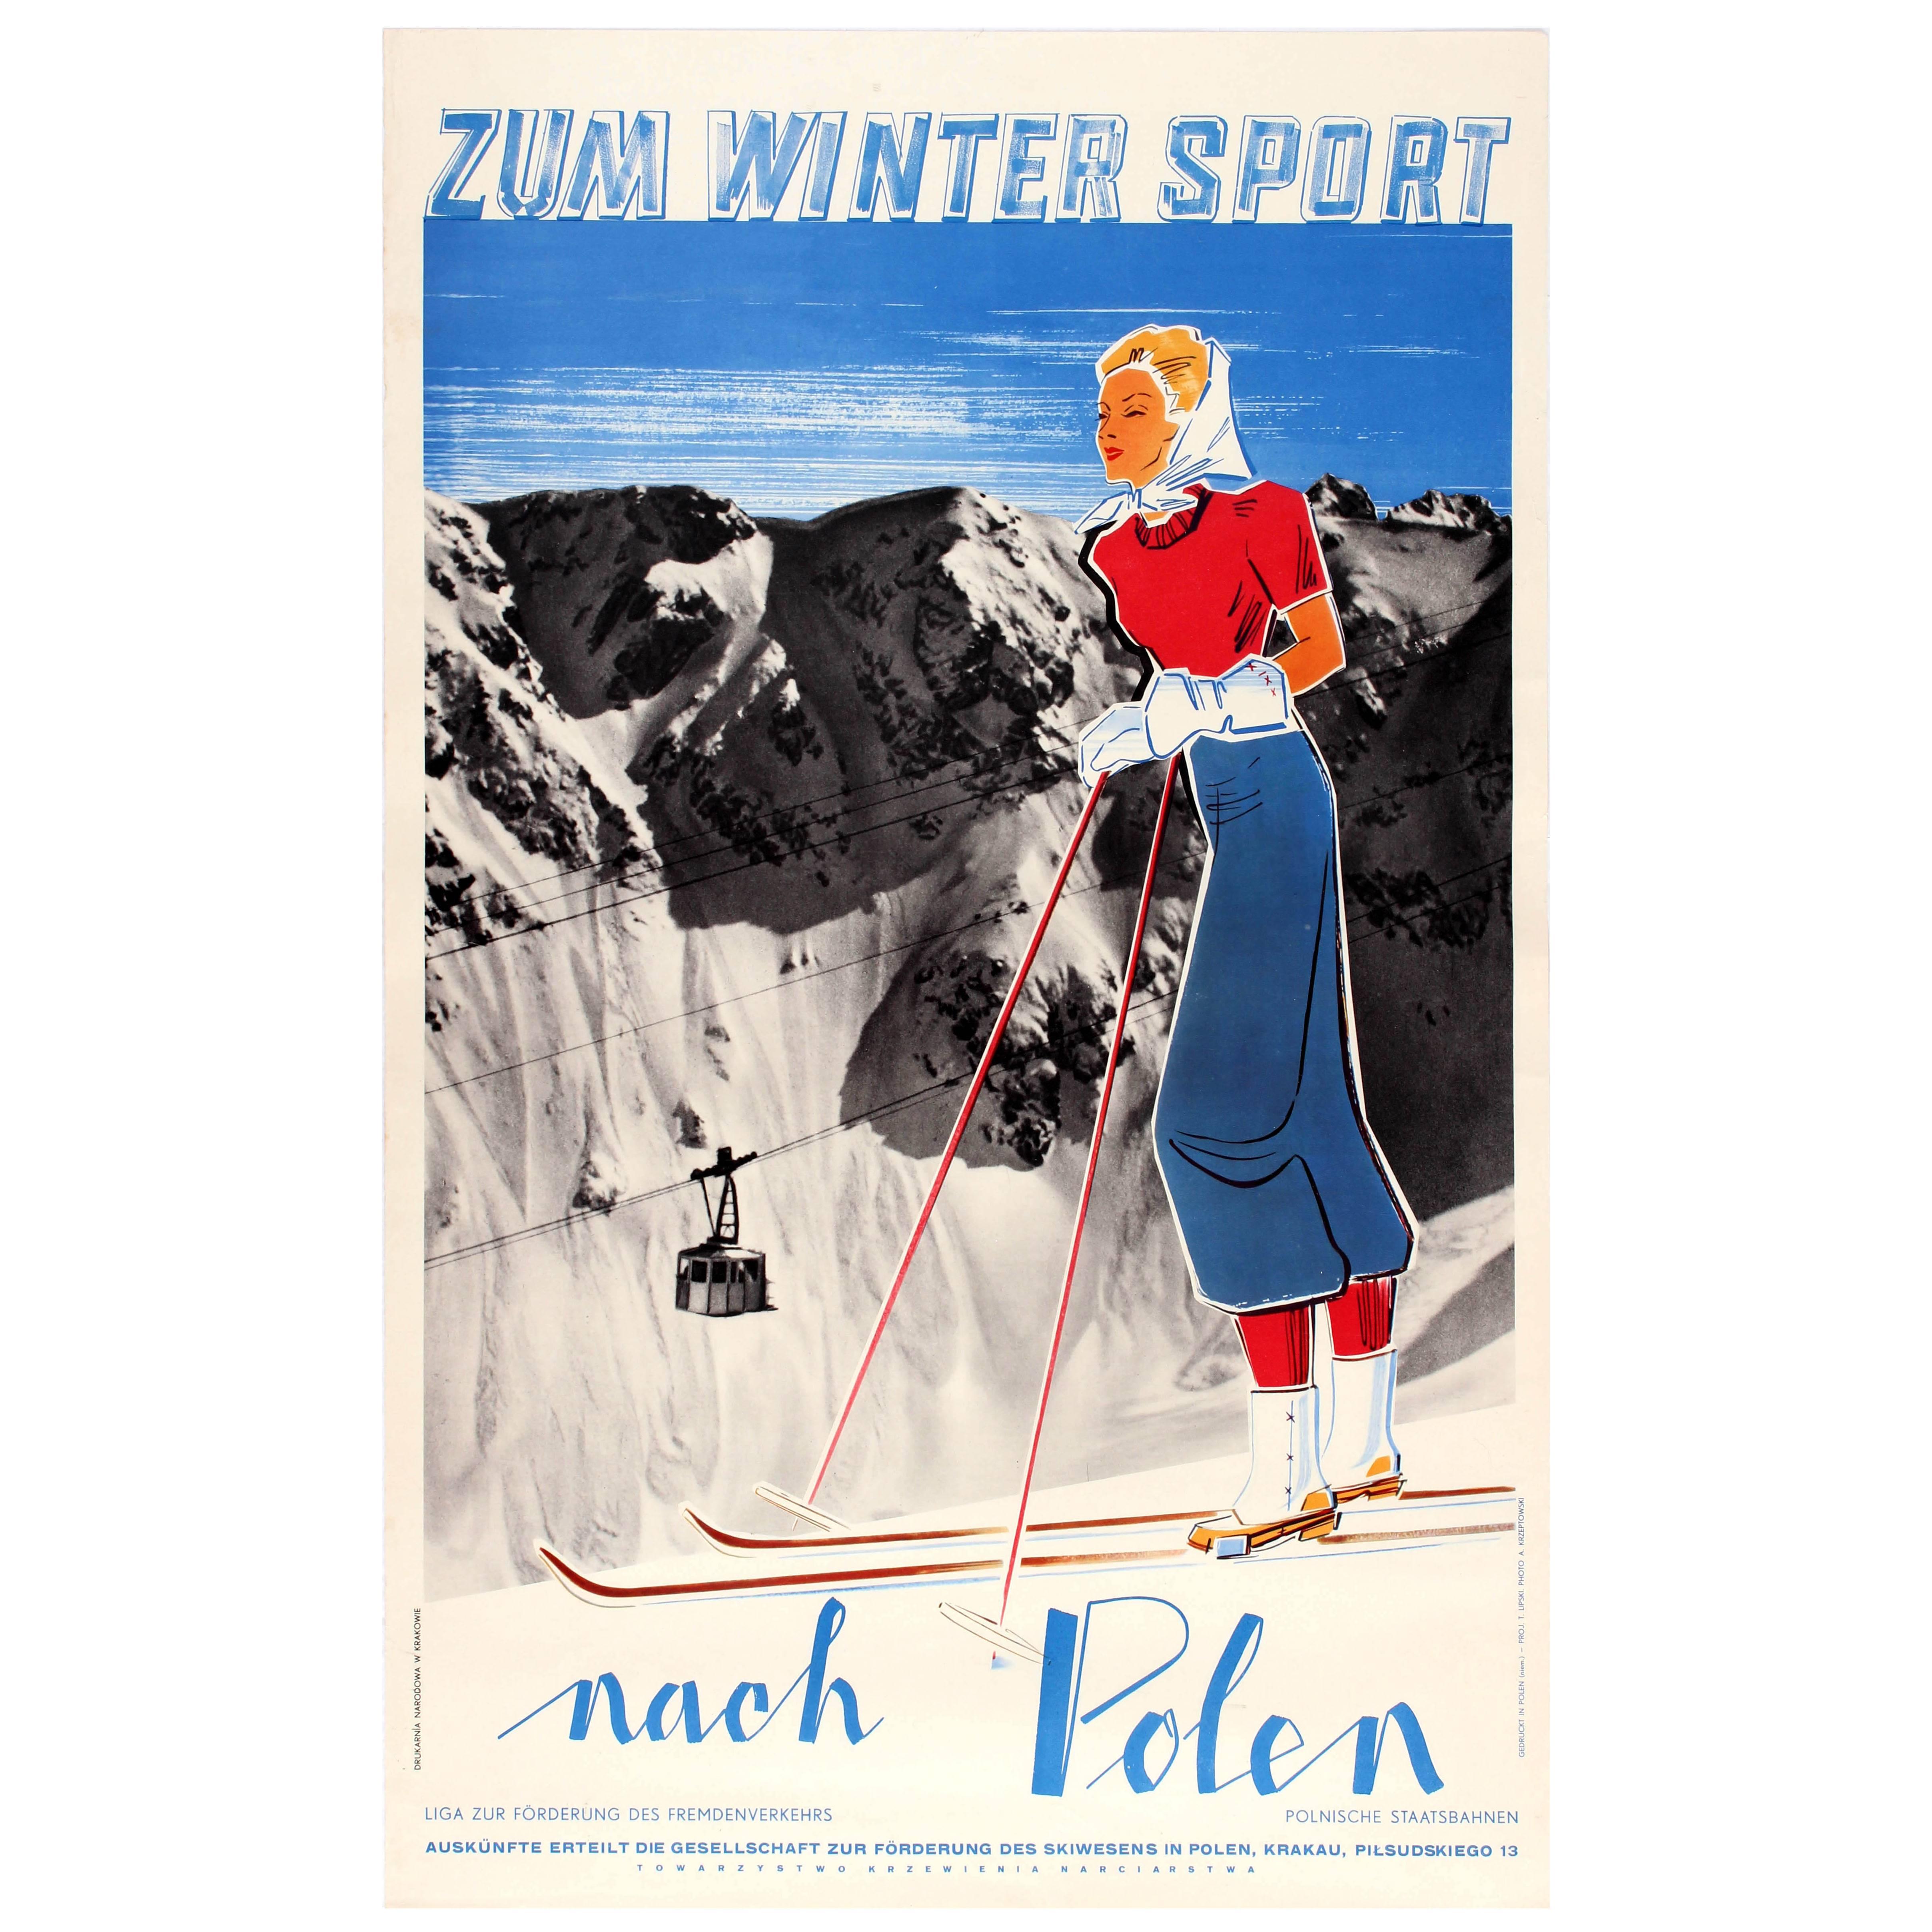 Original Vintage 1930s Skiing Travel Poster Advertising Poland for Winter Sports